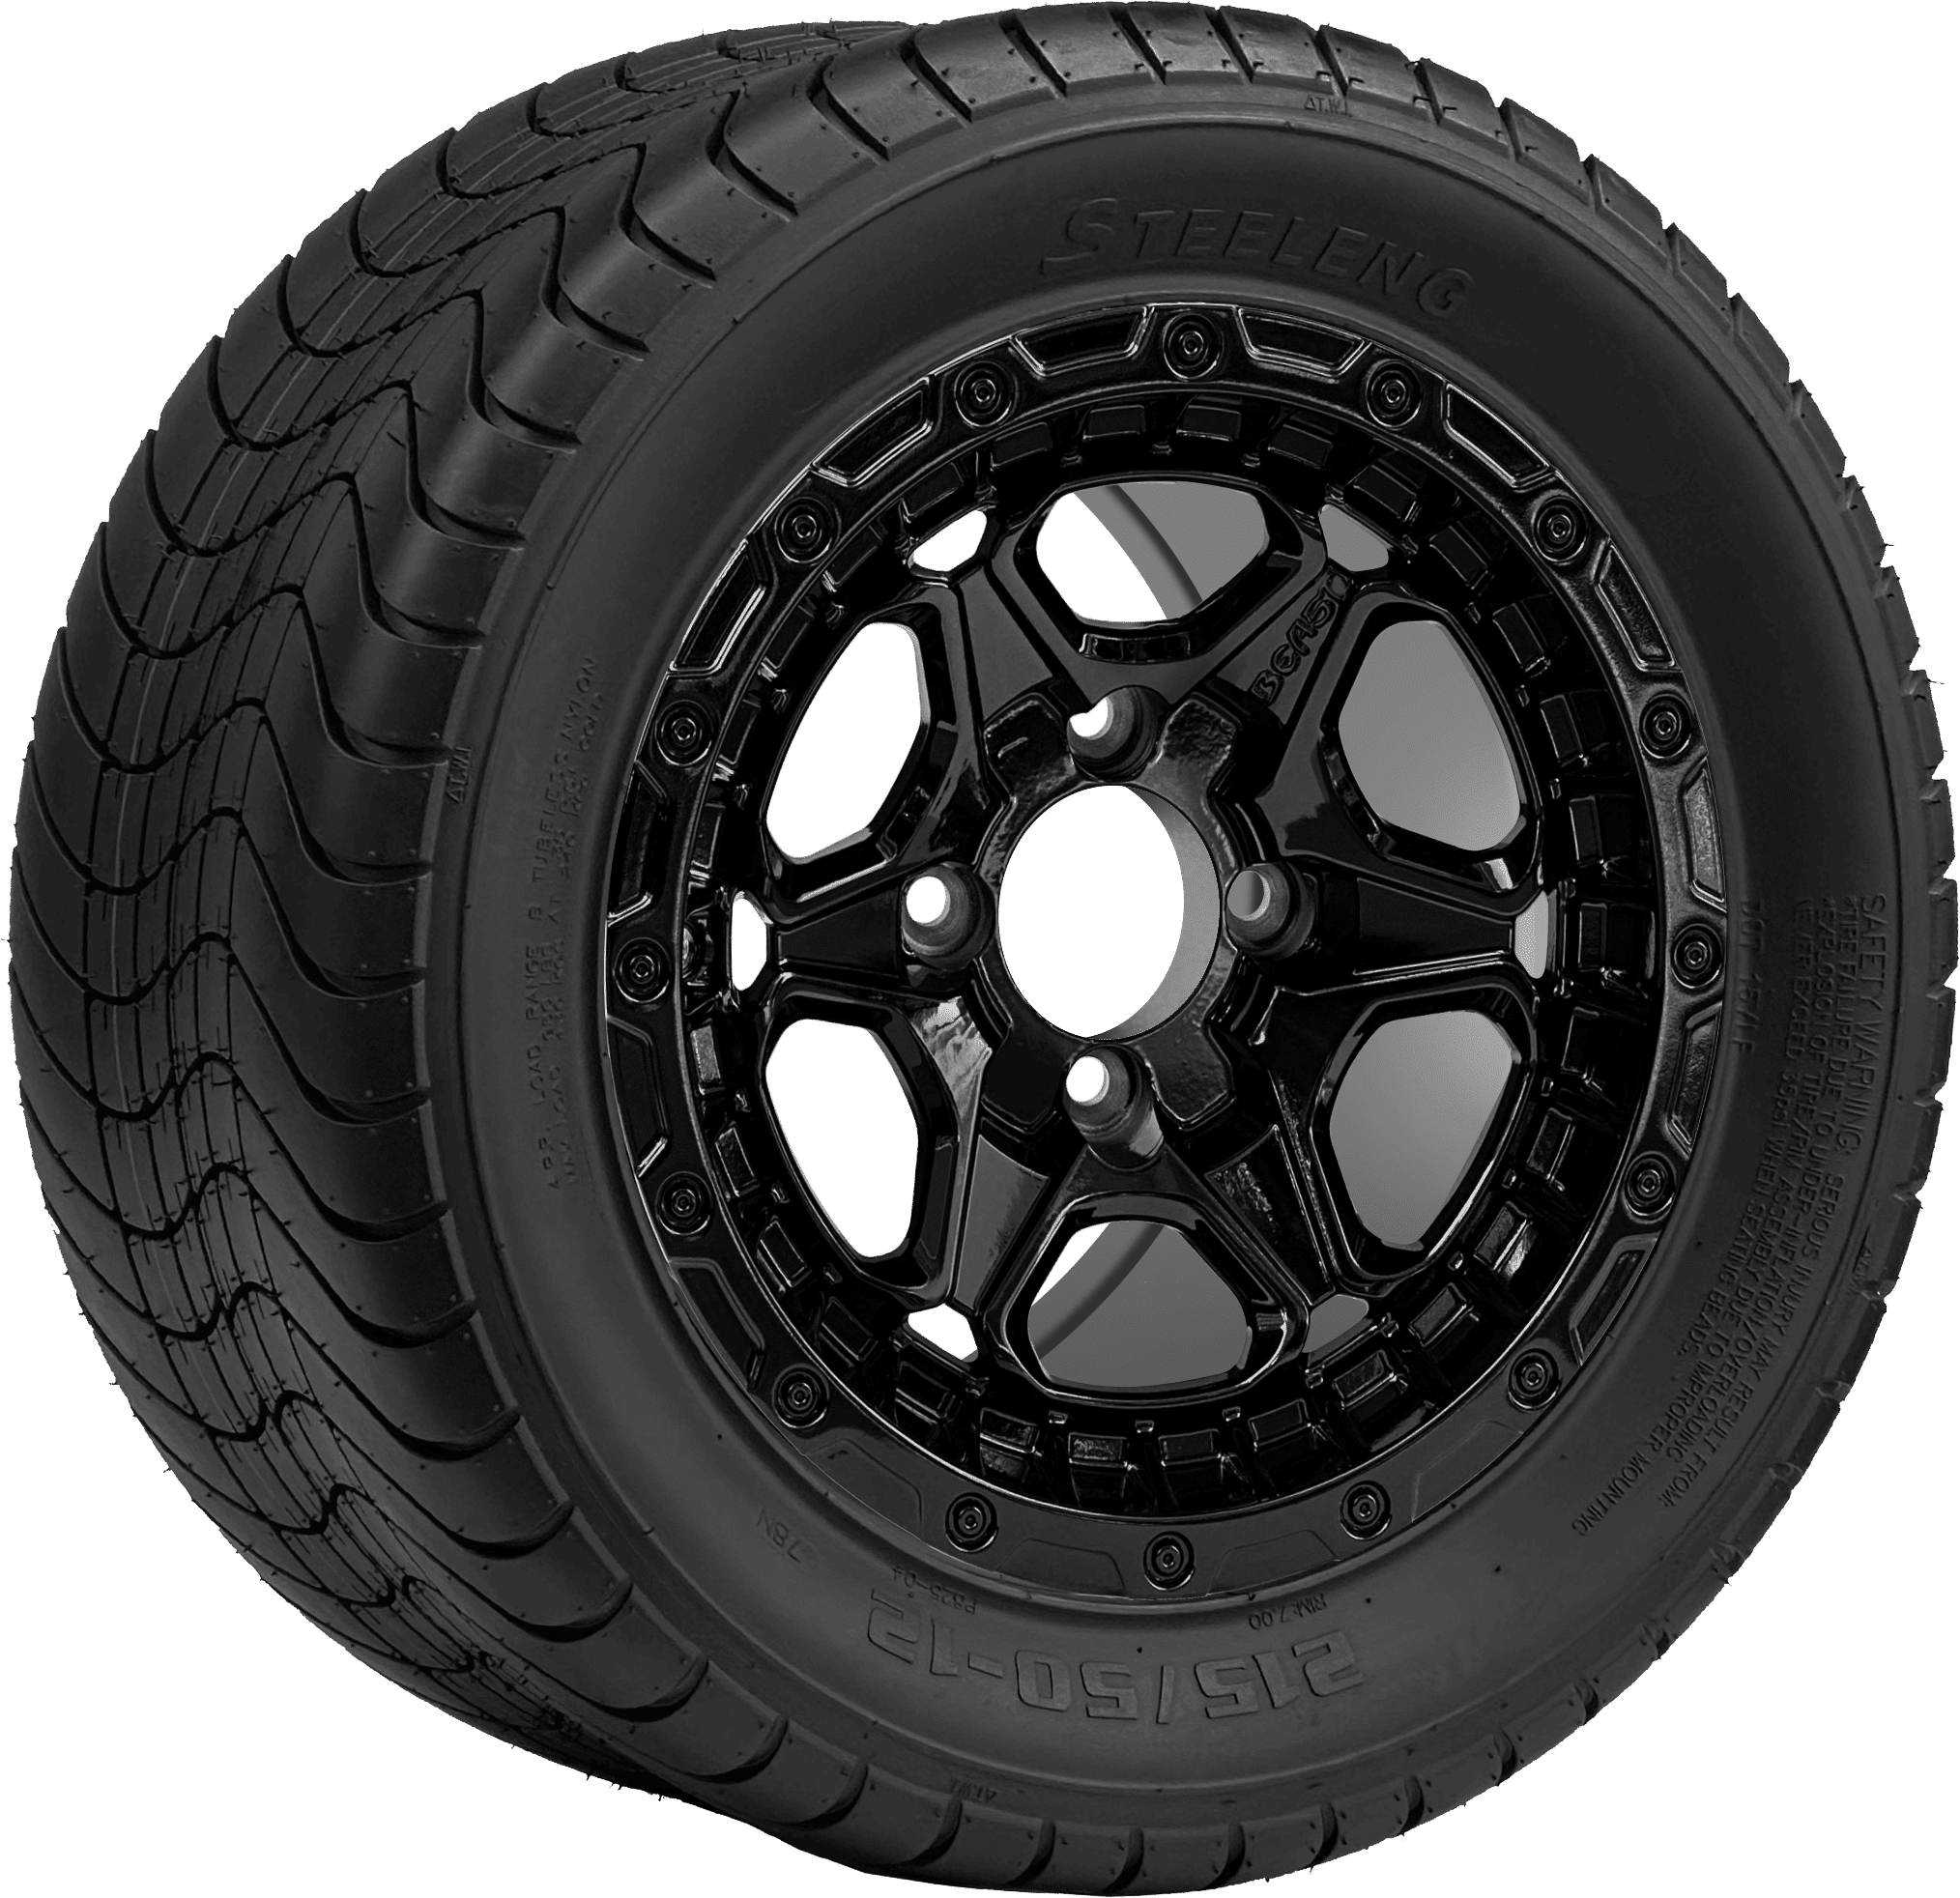 BNDL-TR1213-WH1264-CC0027-LN0005 12″ GRIZZLY GLOSSY BLACK WHEEL – ALUMINUM ALLOY / STEELENG 215/50-12 COMFORT RIDE STREET TIRE DOT APPROVED